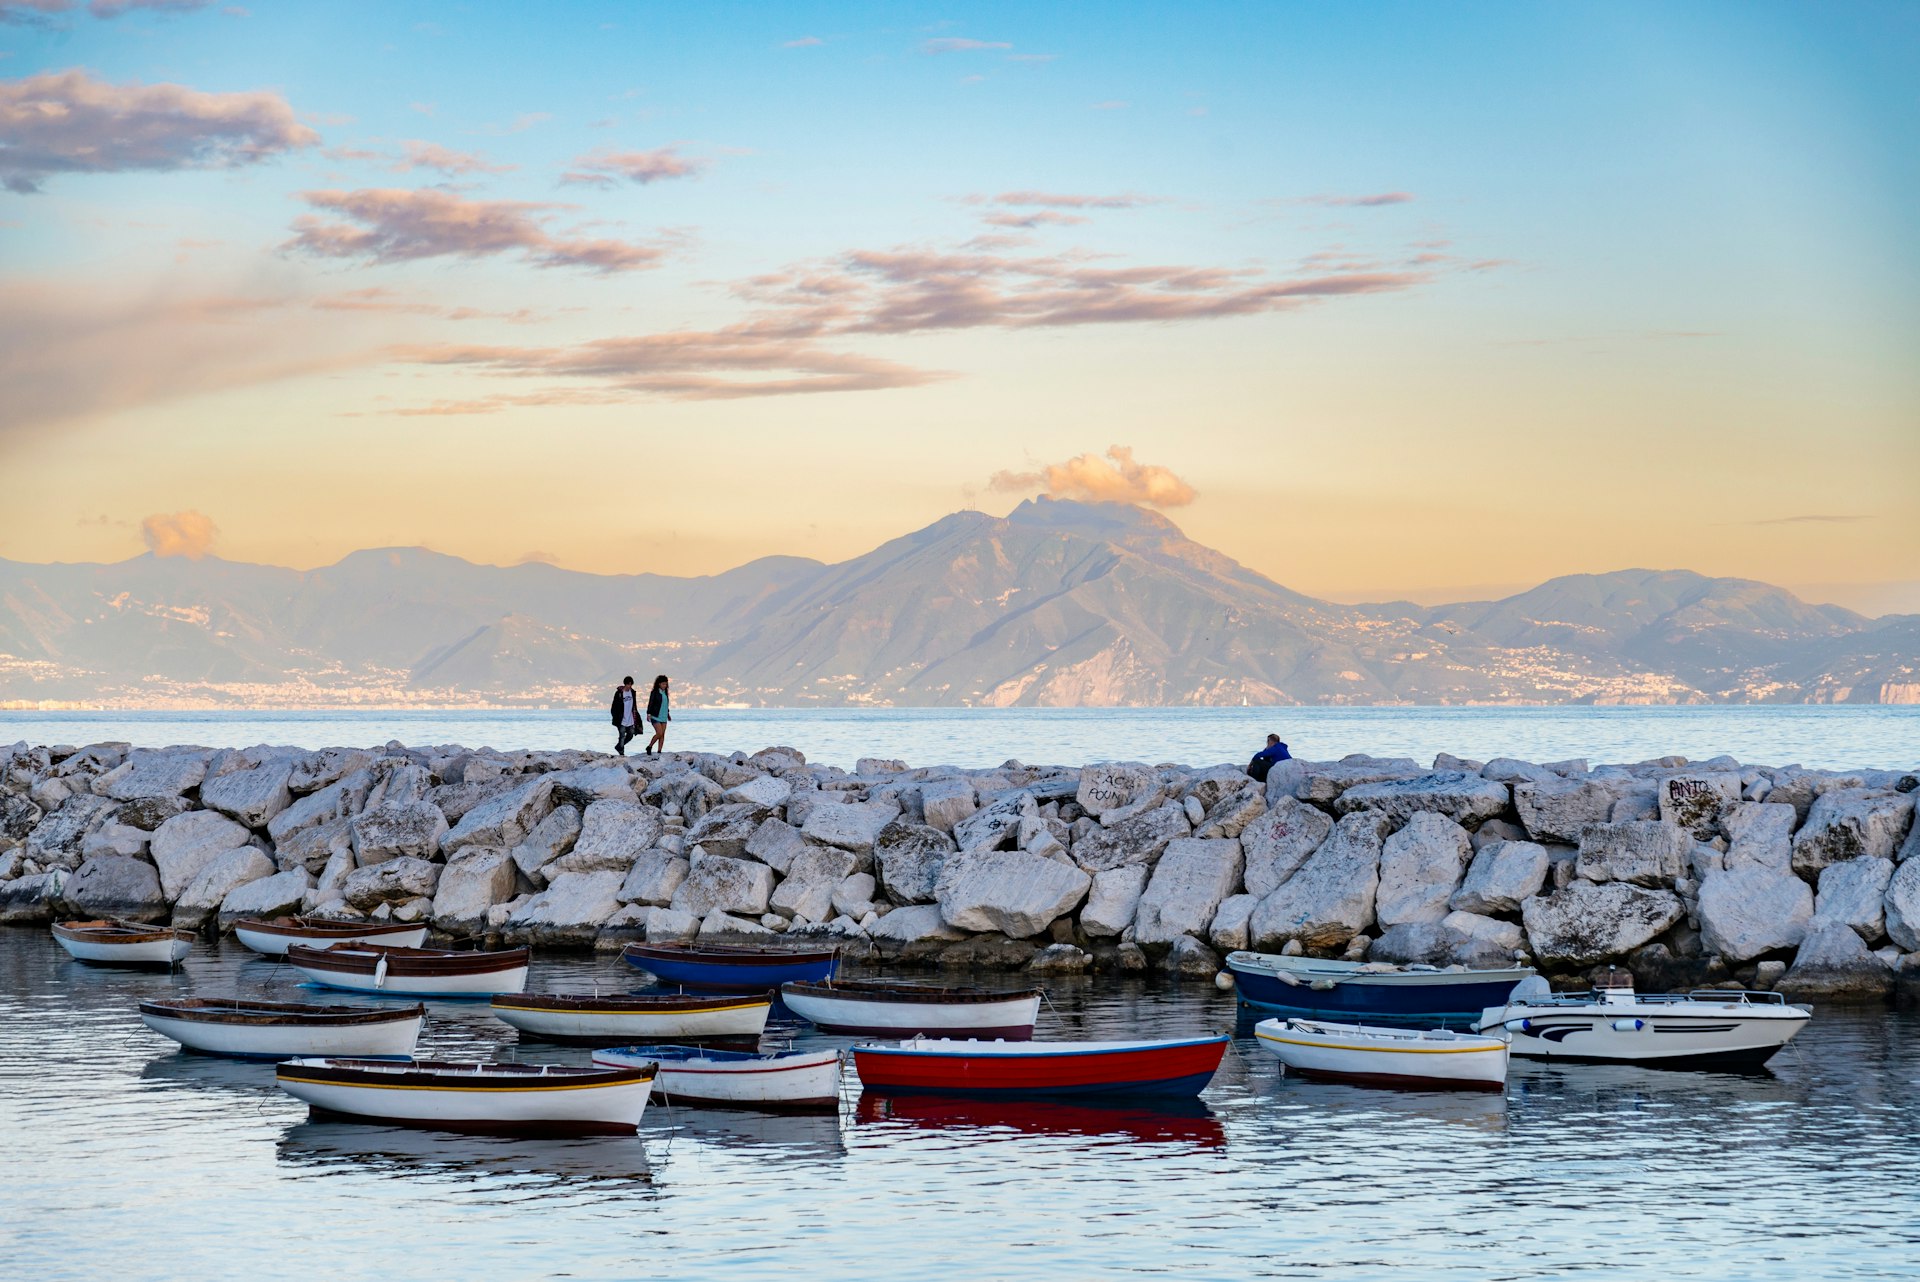 Two people walk along the Napoli waterfront at dusk